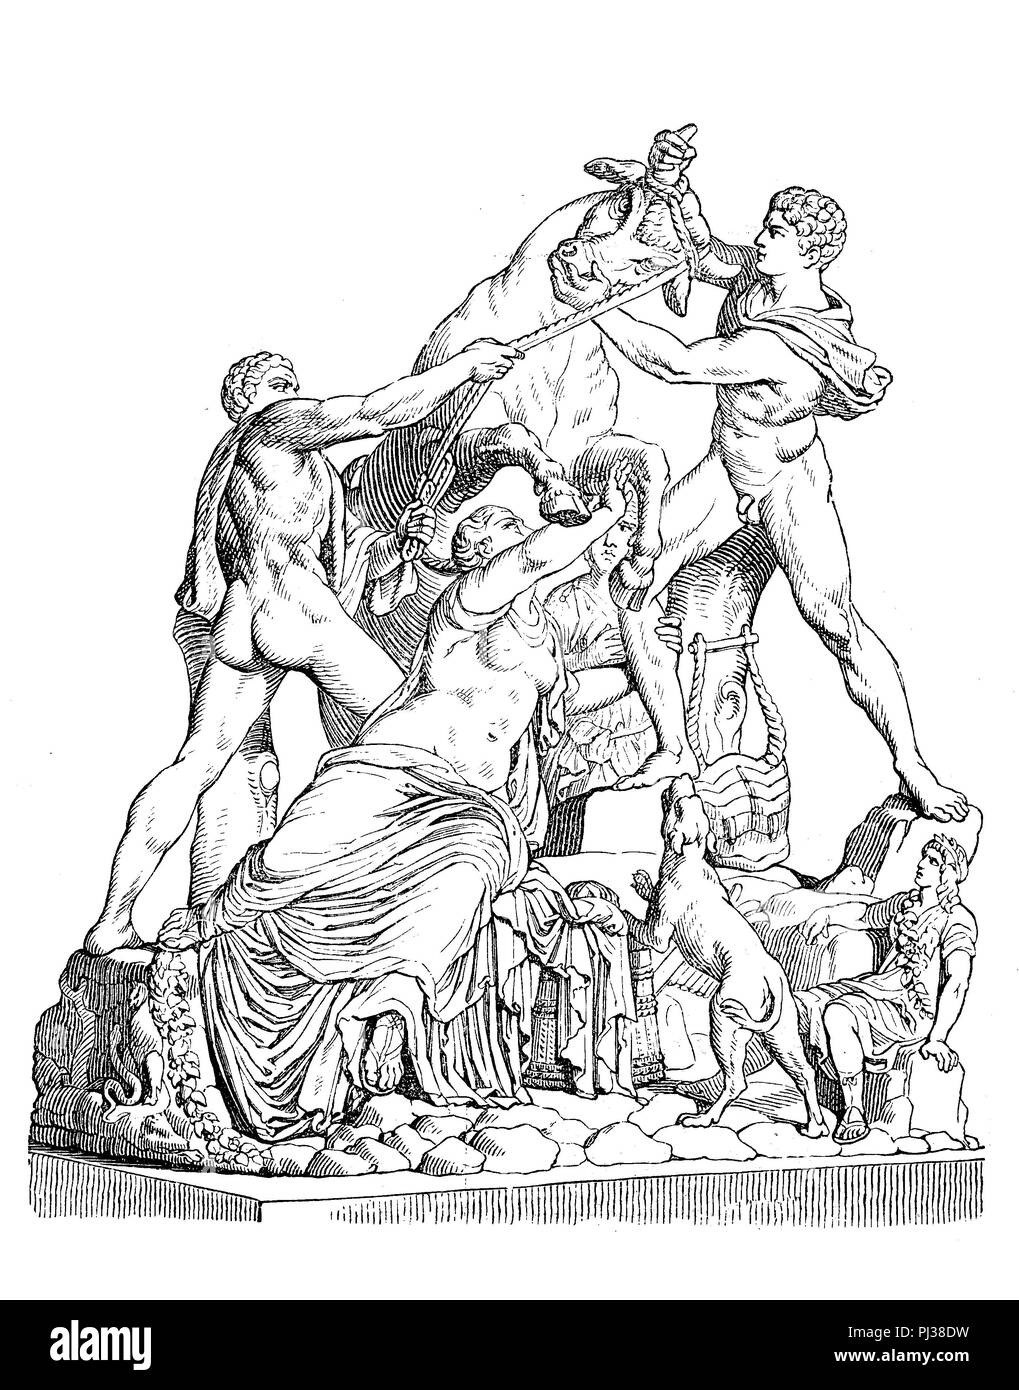 The Farnese Bull, Toro Farnese, formerly in the Farnese collection in Rome, is a massive Roman elaborated copy of a Hellenistic sculpture, digital improved reproduction of an original from the year 1895 Stock Photo